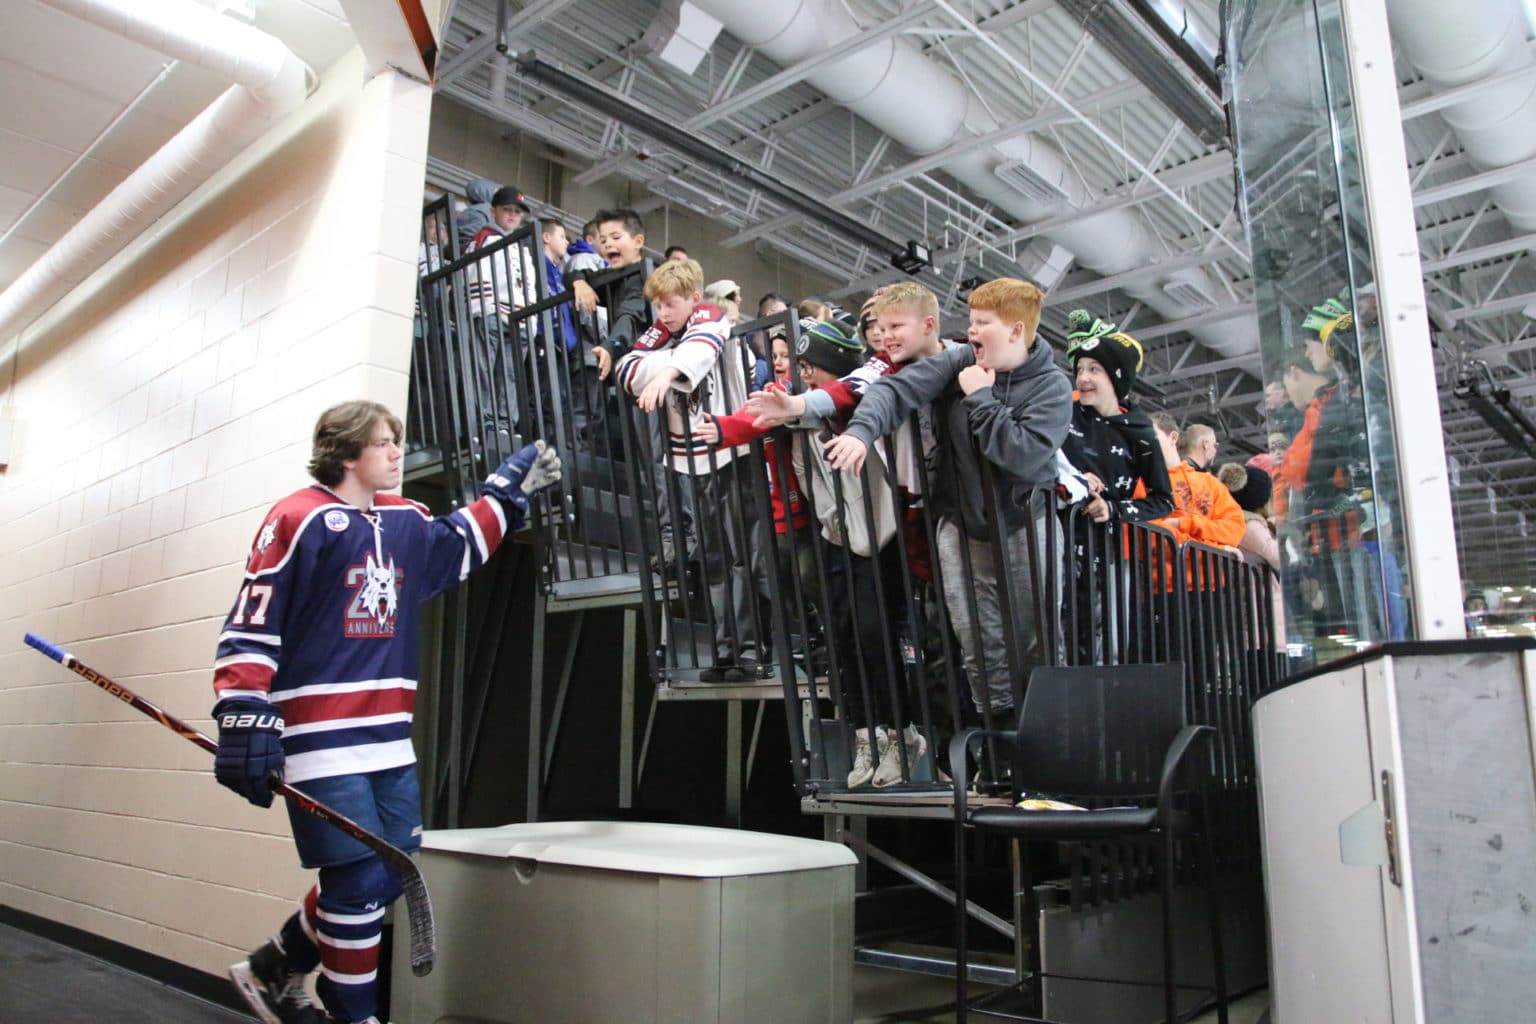 Ice dogs high fiving fans